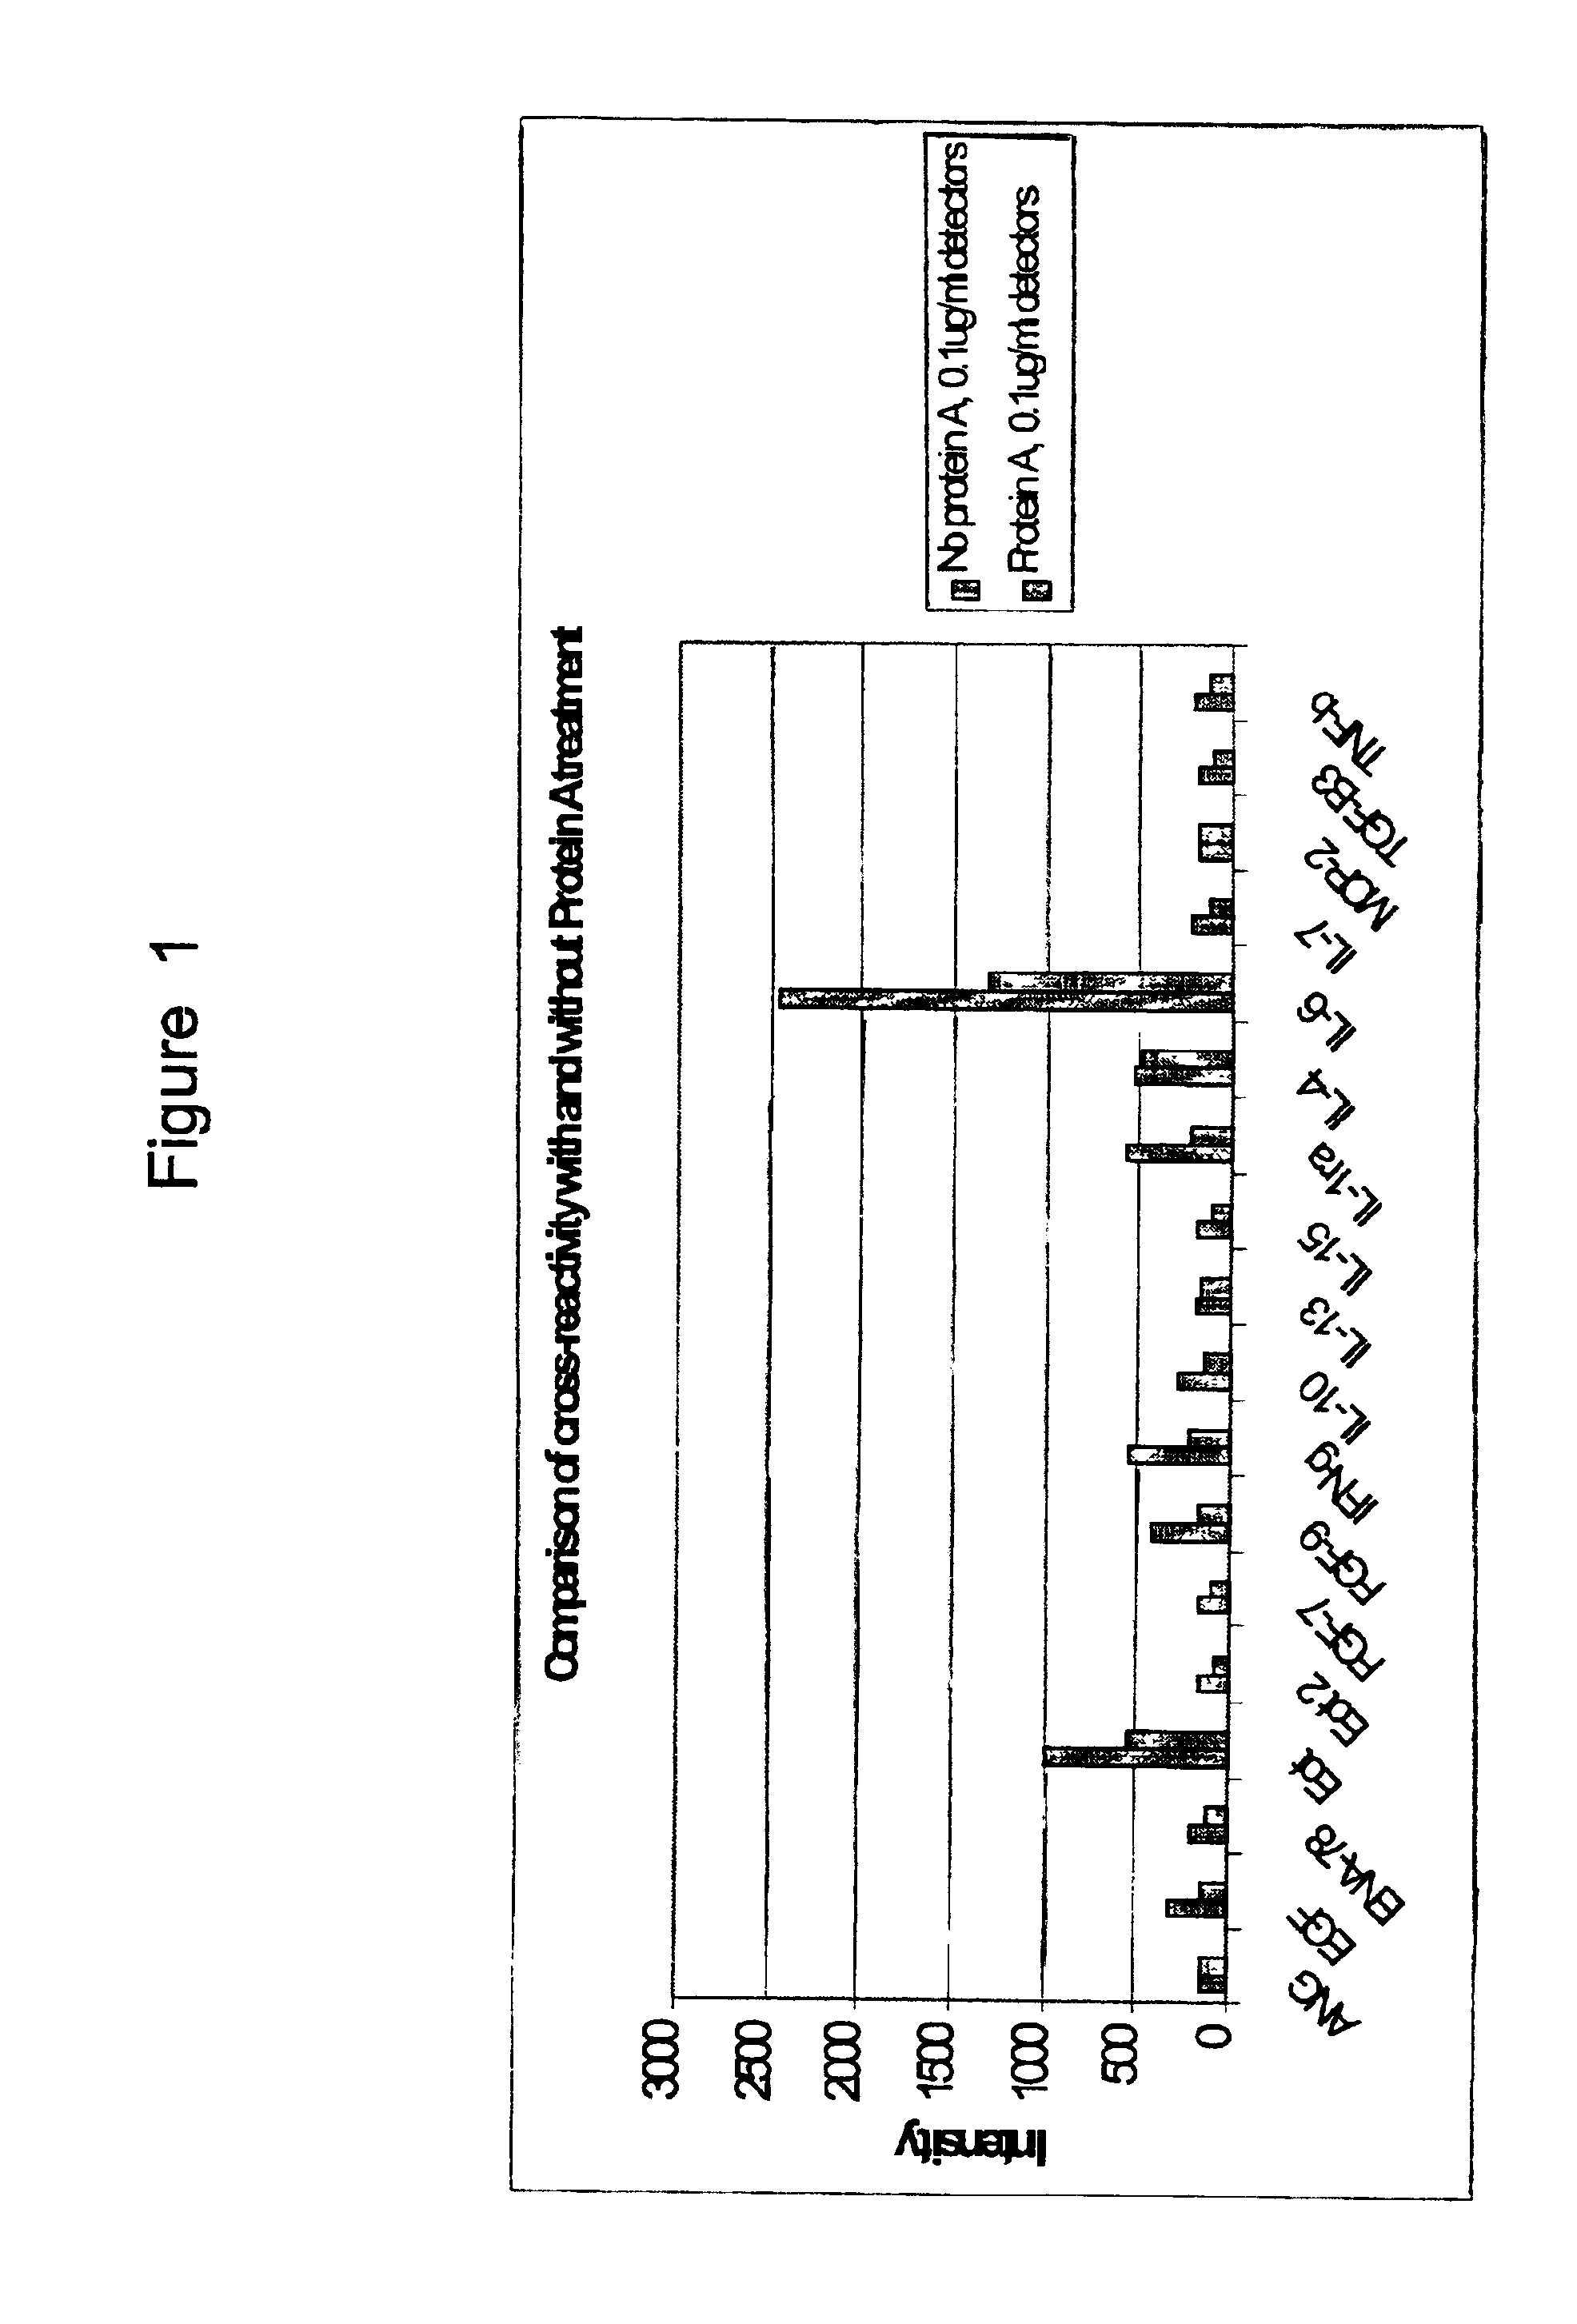 Suppression of cross-reactivity and non-specific binding by antibodies using protein A